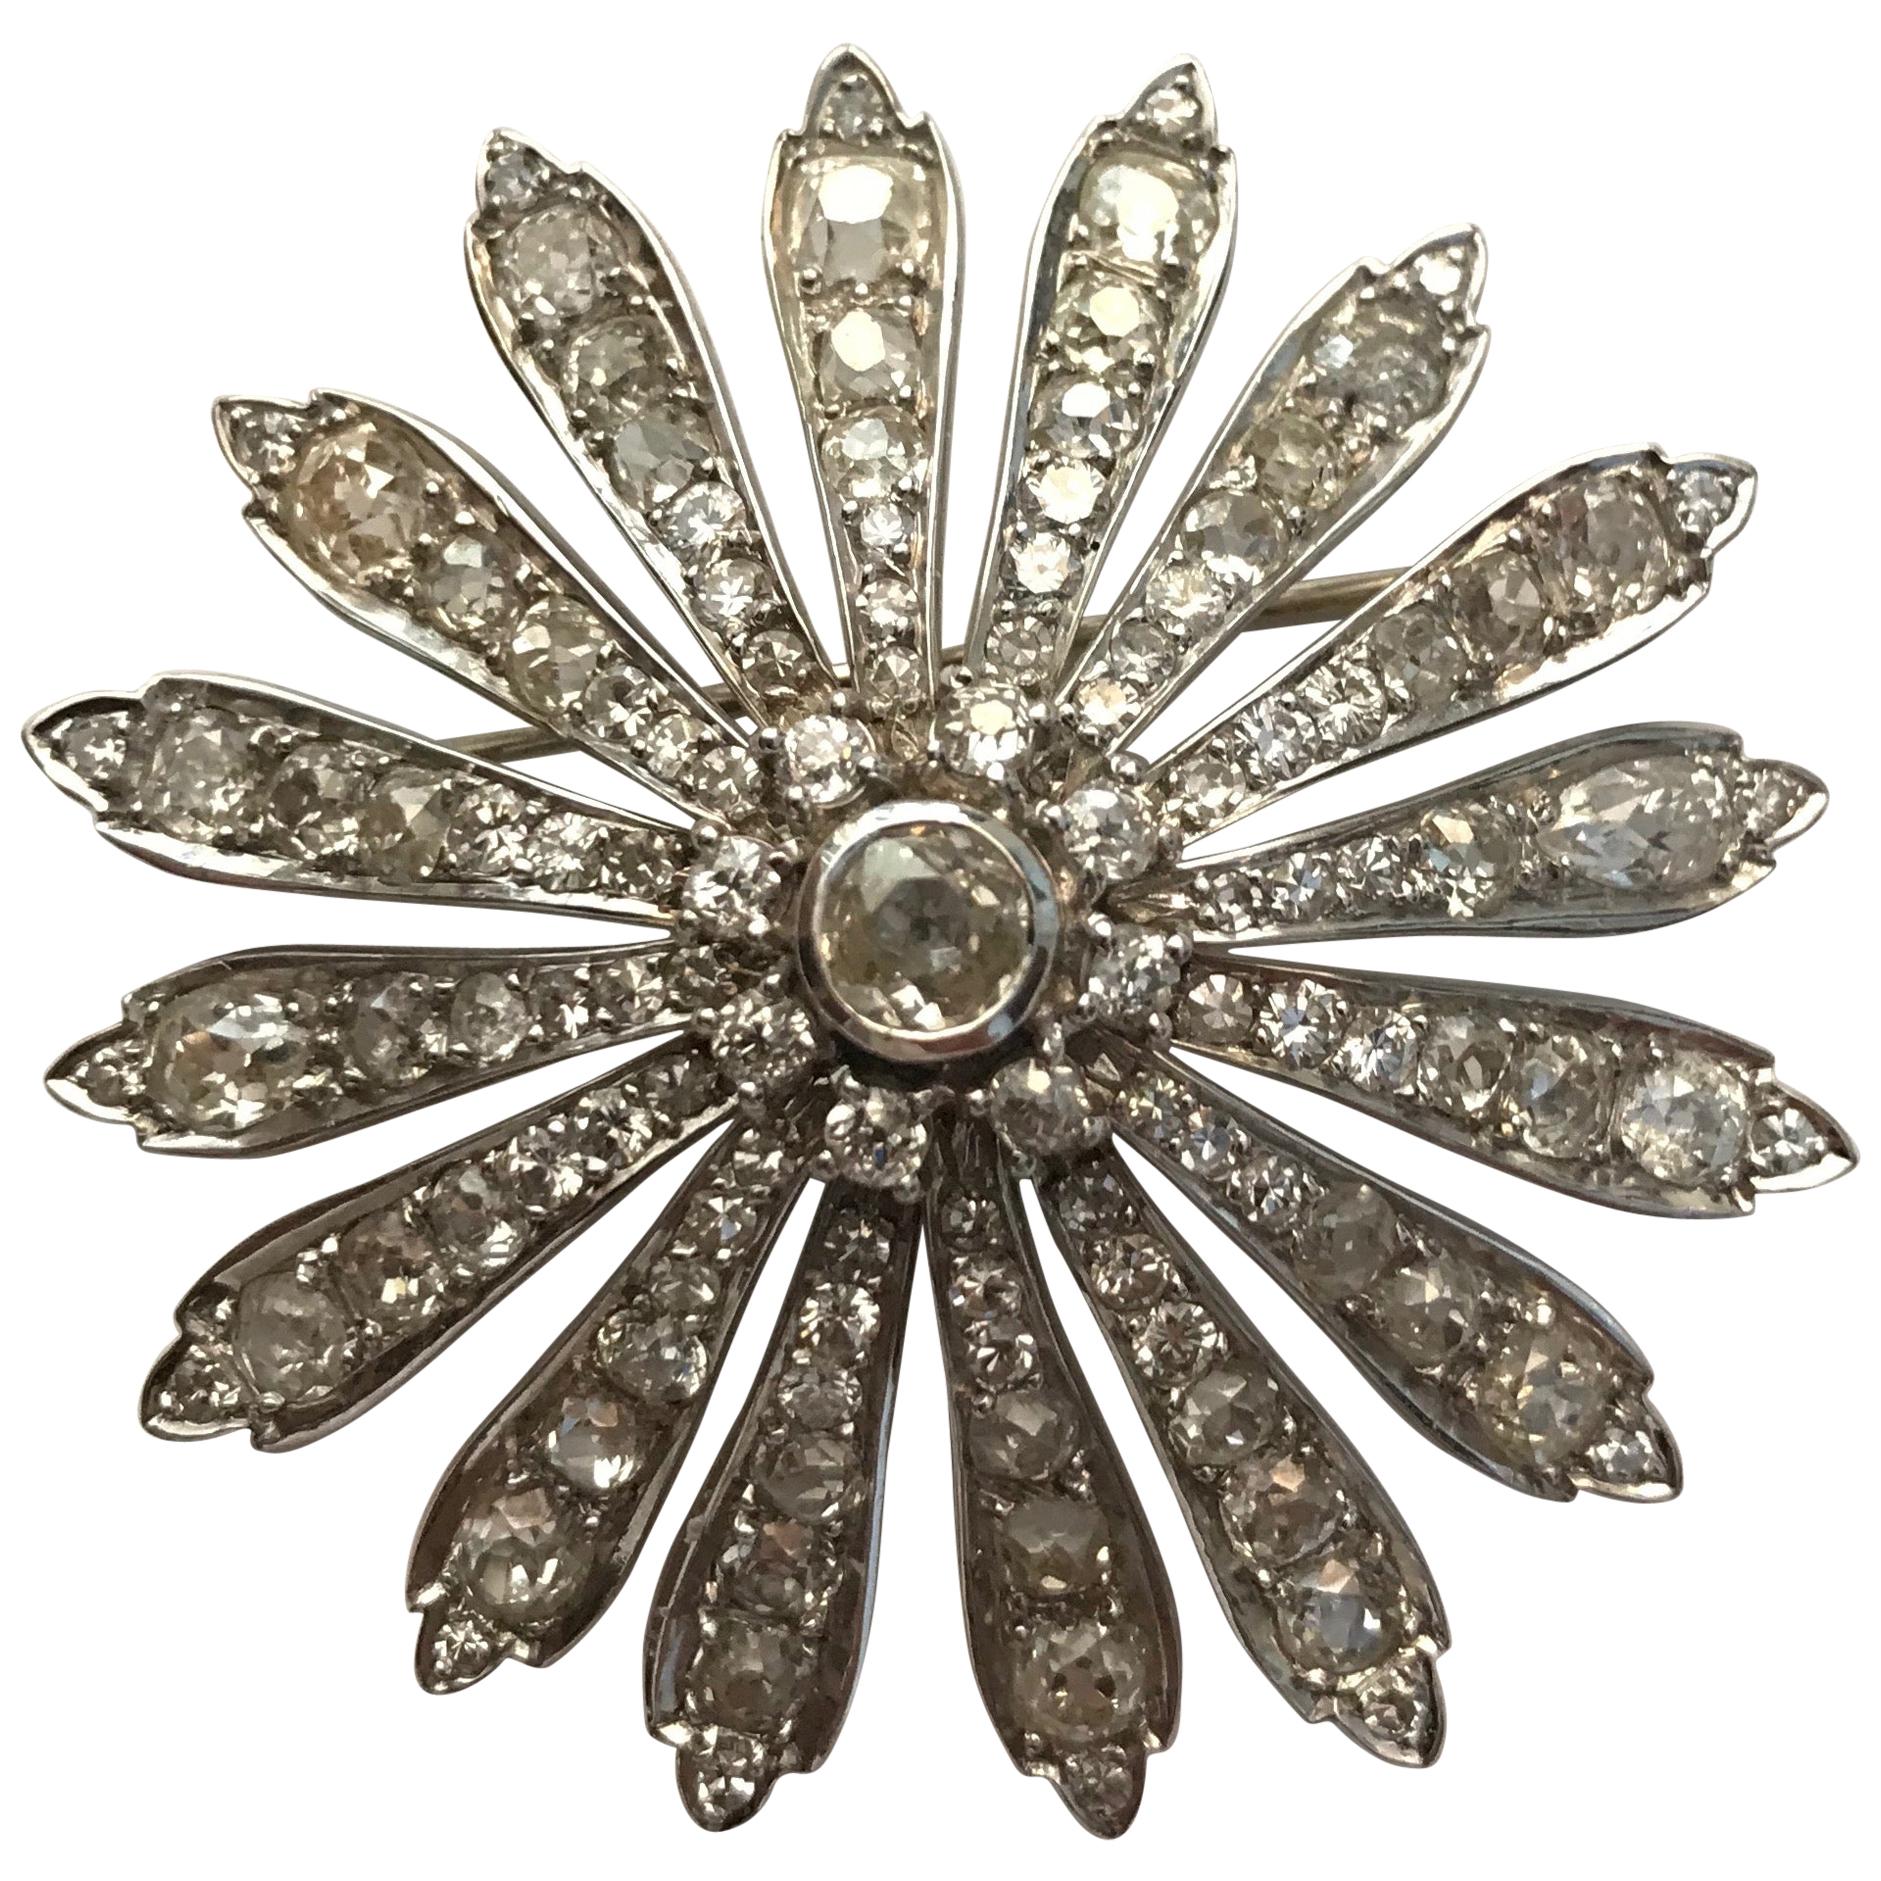 Vintage Daisy Brooch circa 1900-1930 in 18 Carat White Gold and Diamonds